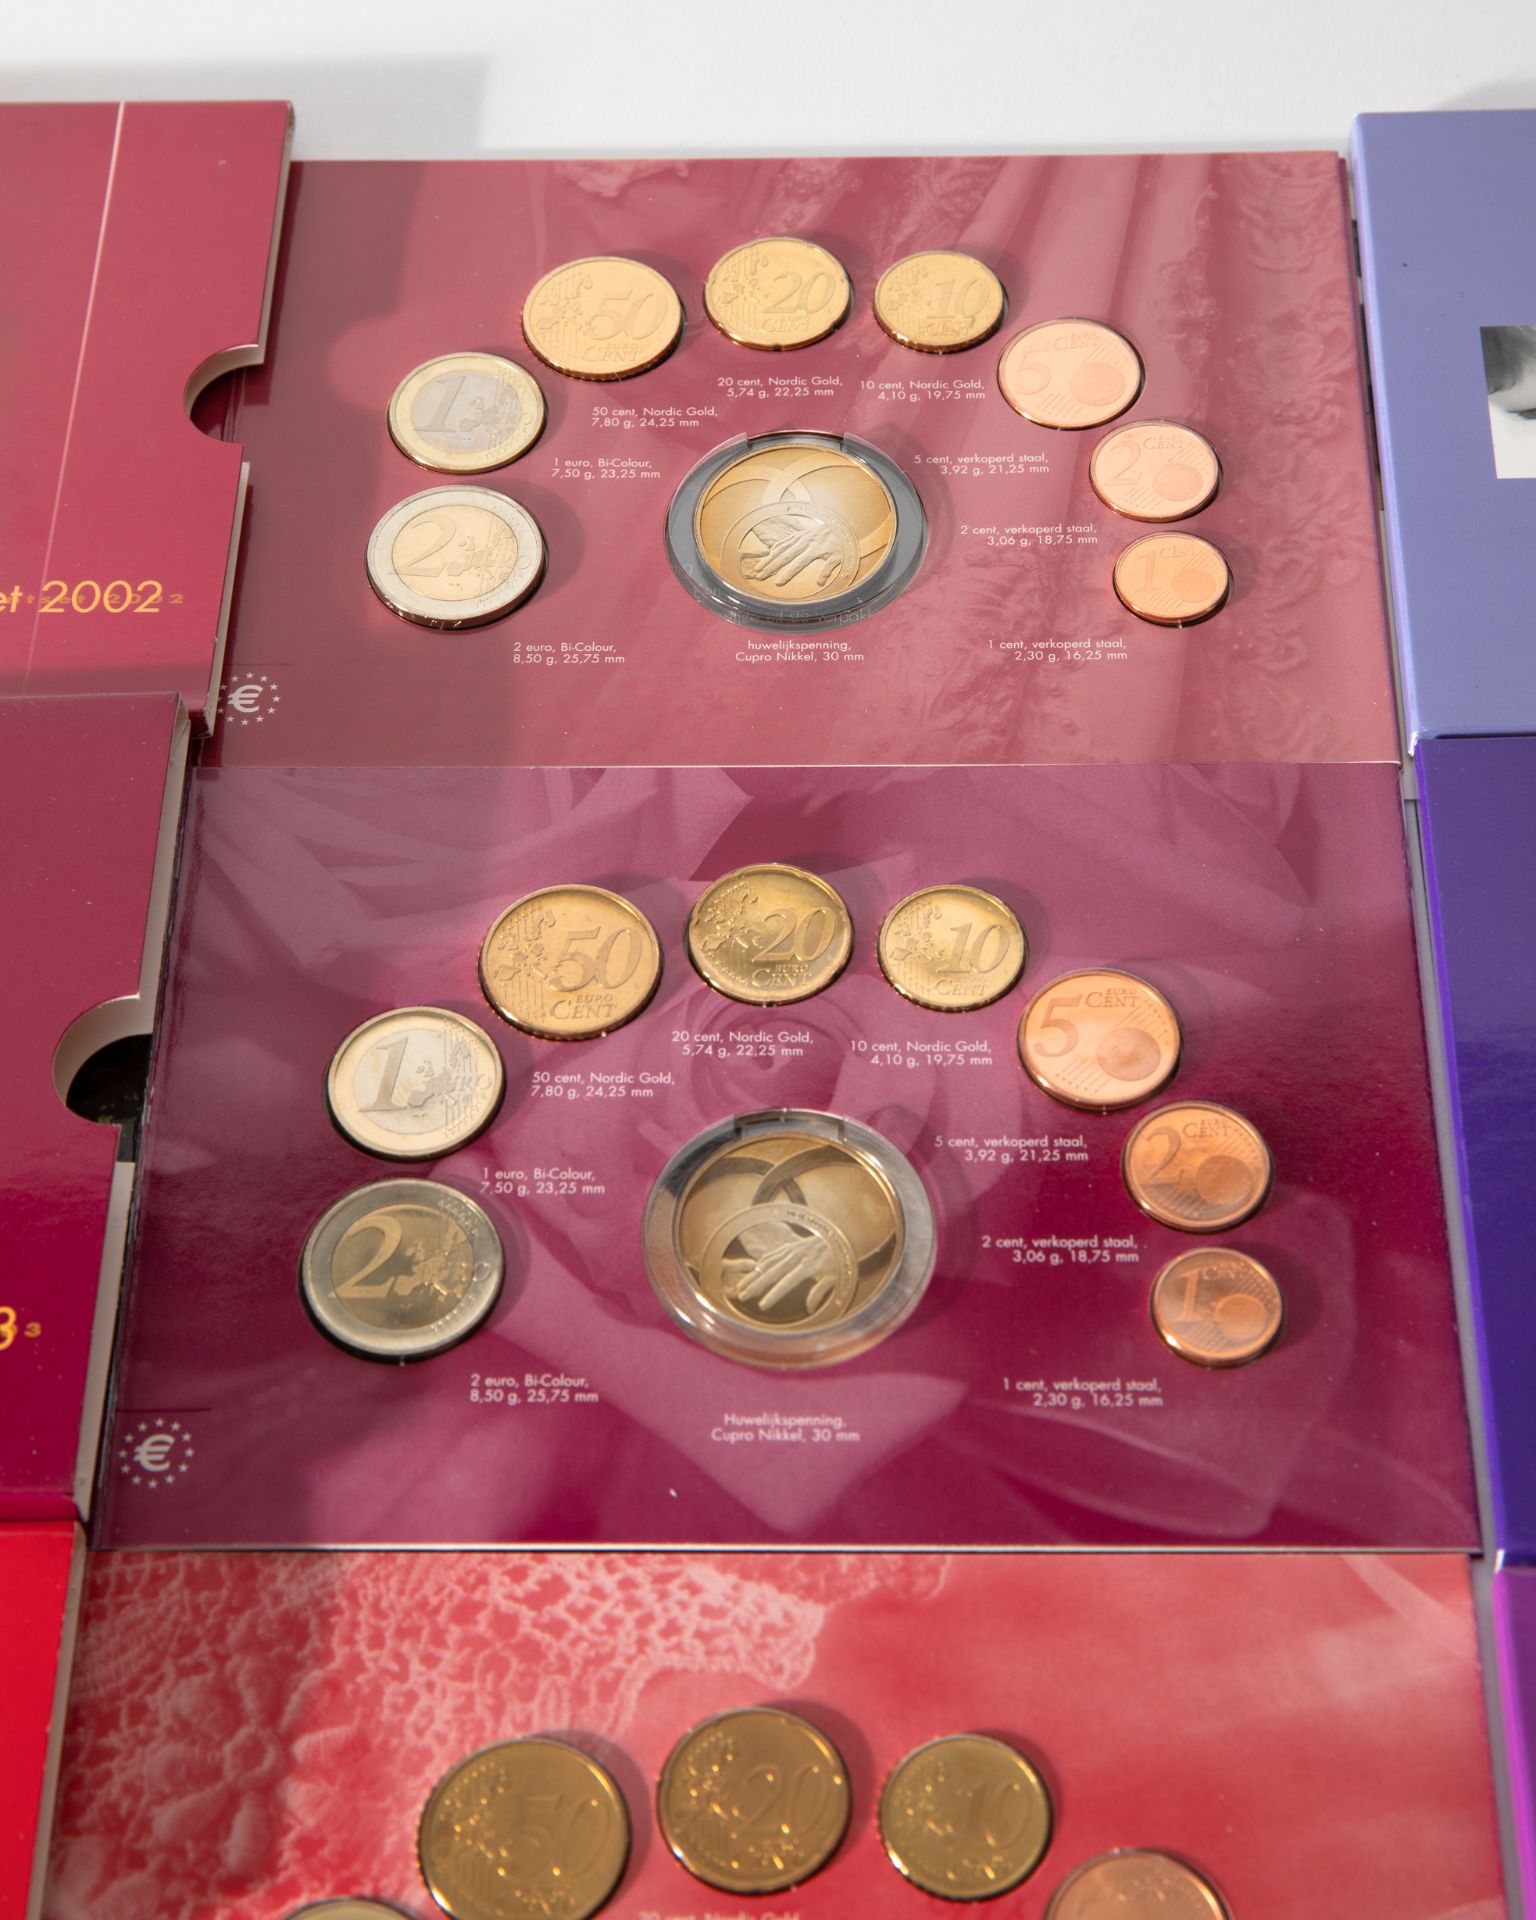 14x Netherlands Euro Coin Sets - Image 7 of 10